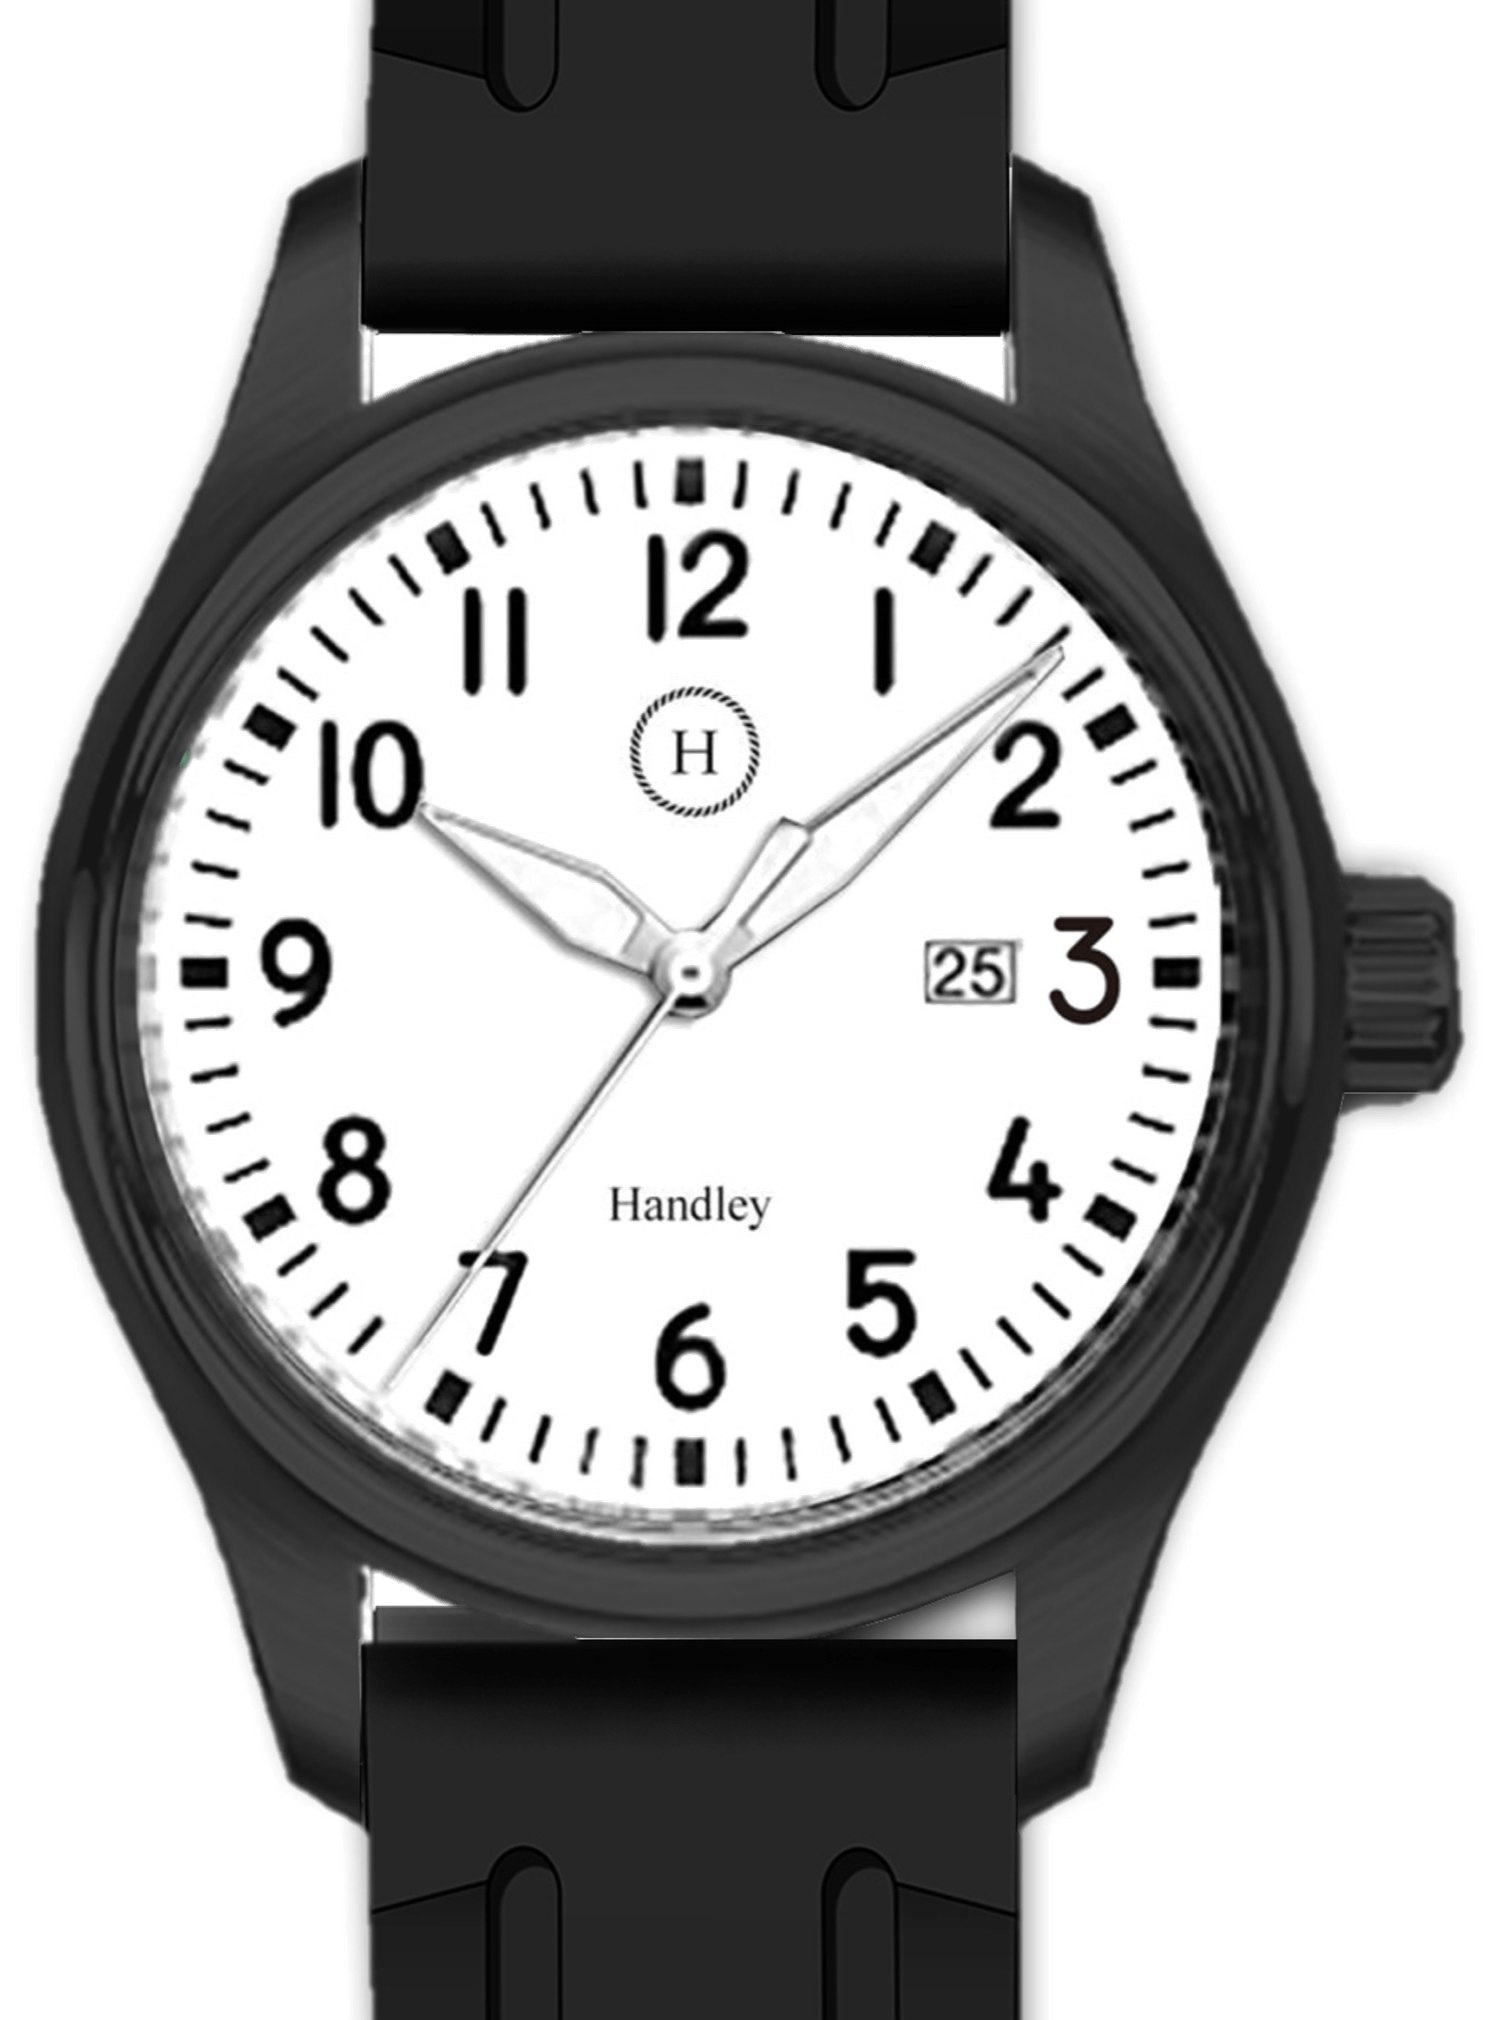 The Muse - Pirate - Handley Watches